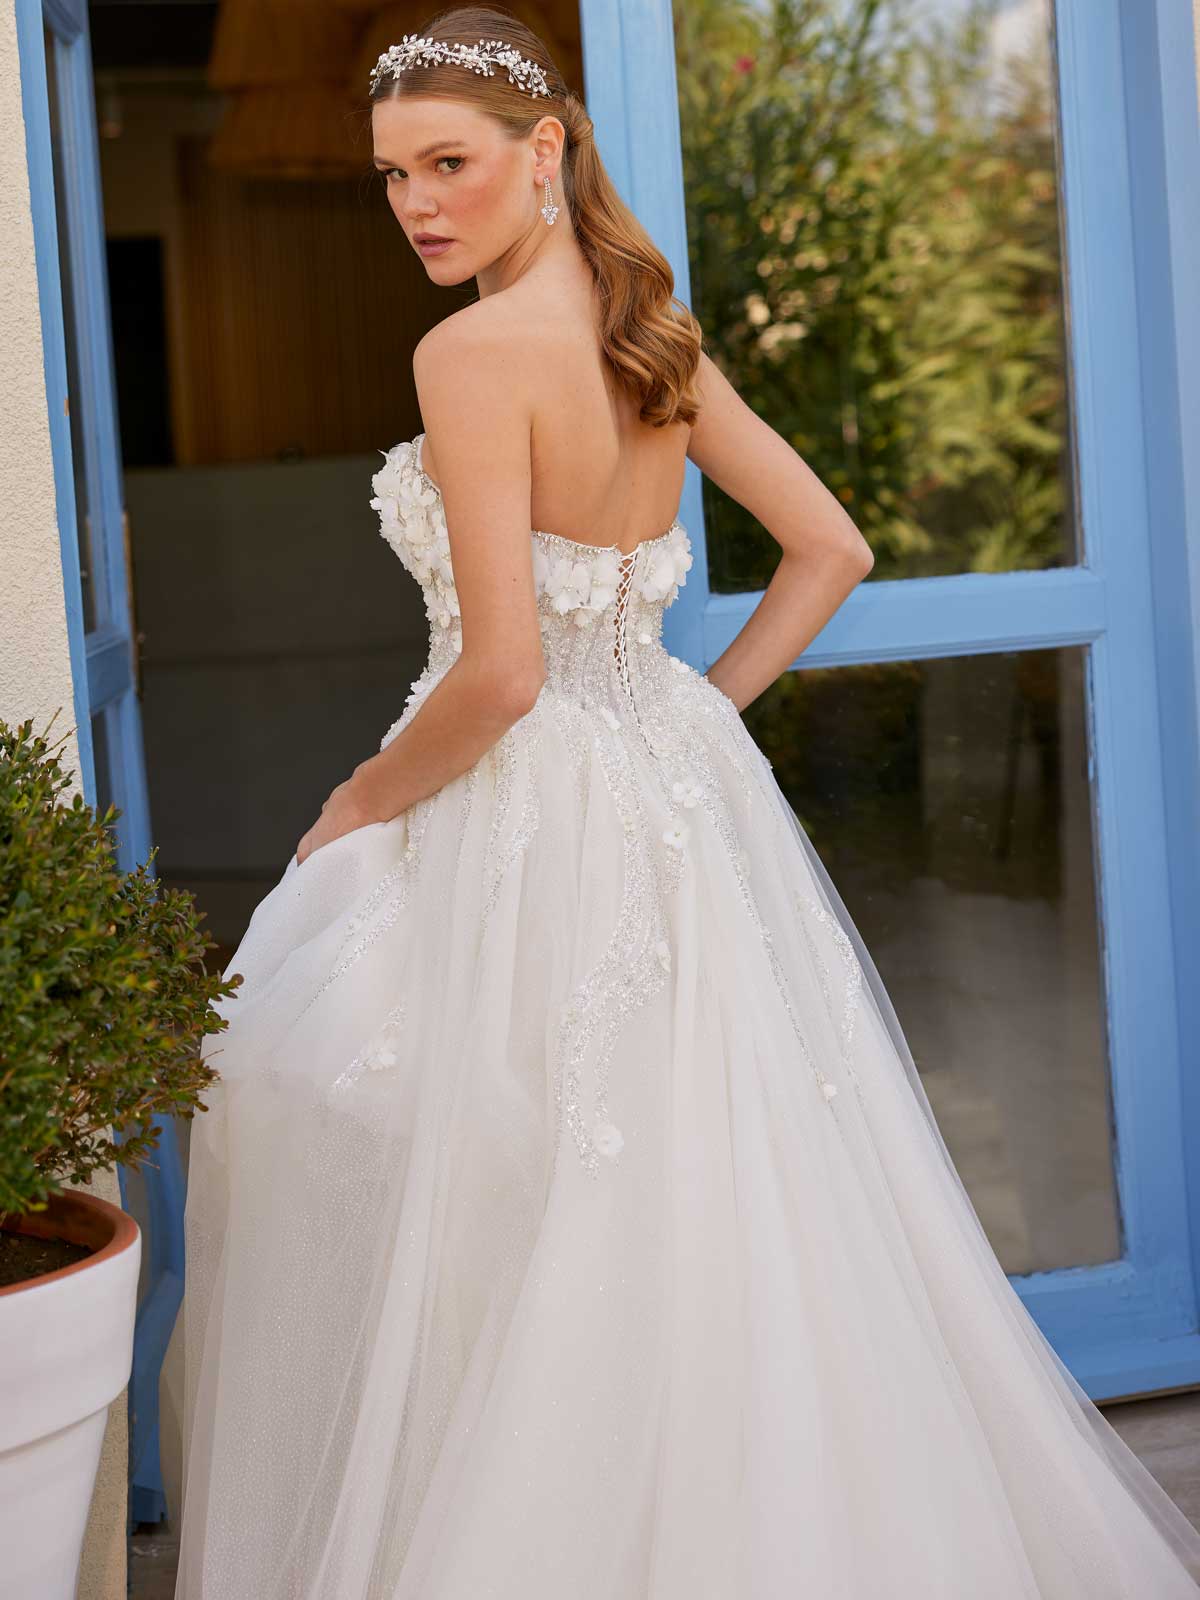 buy 3D Flowers Applique Wedding Dresses Strapless Tulle Beach Chic Boho Bridal Gowns with Crystals edges on sweetheart online bridal gowns website stores